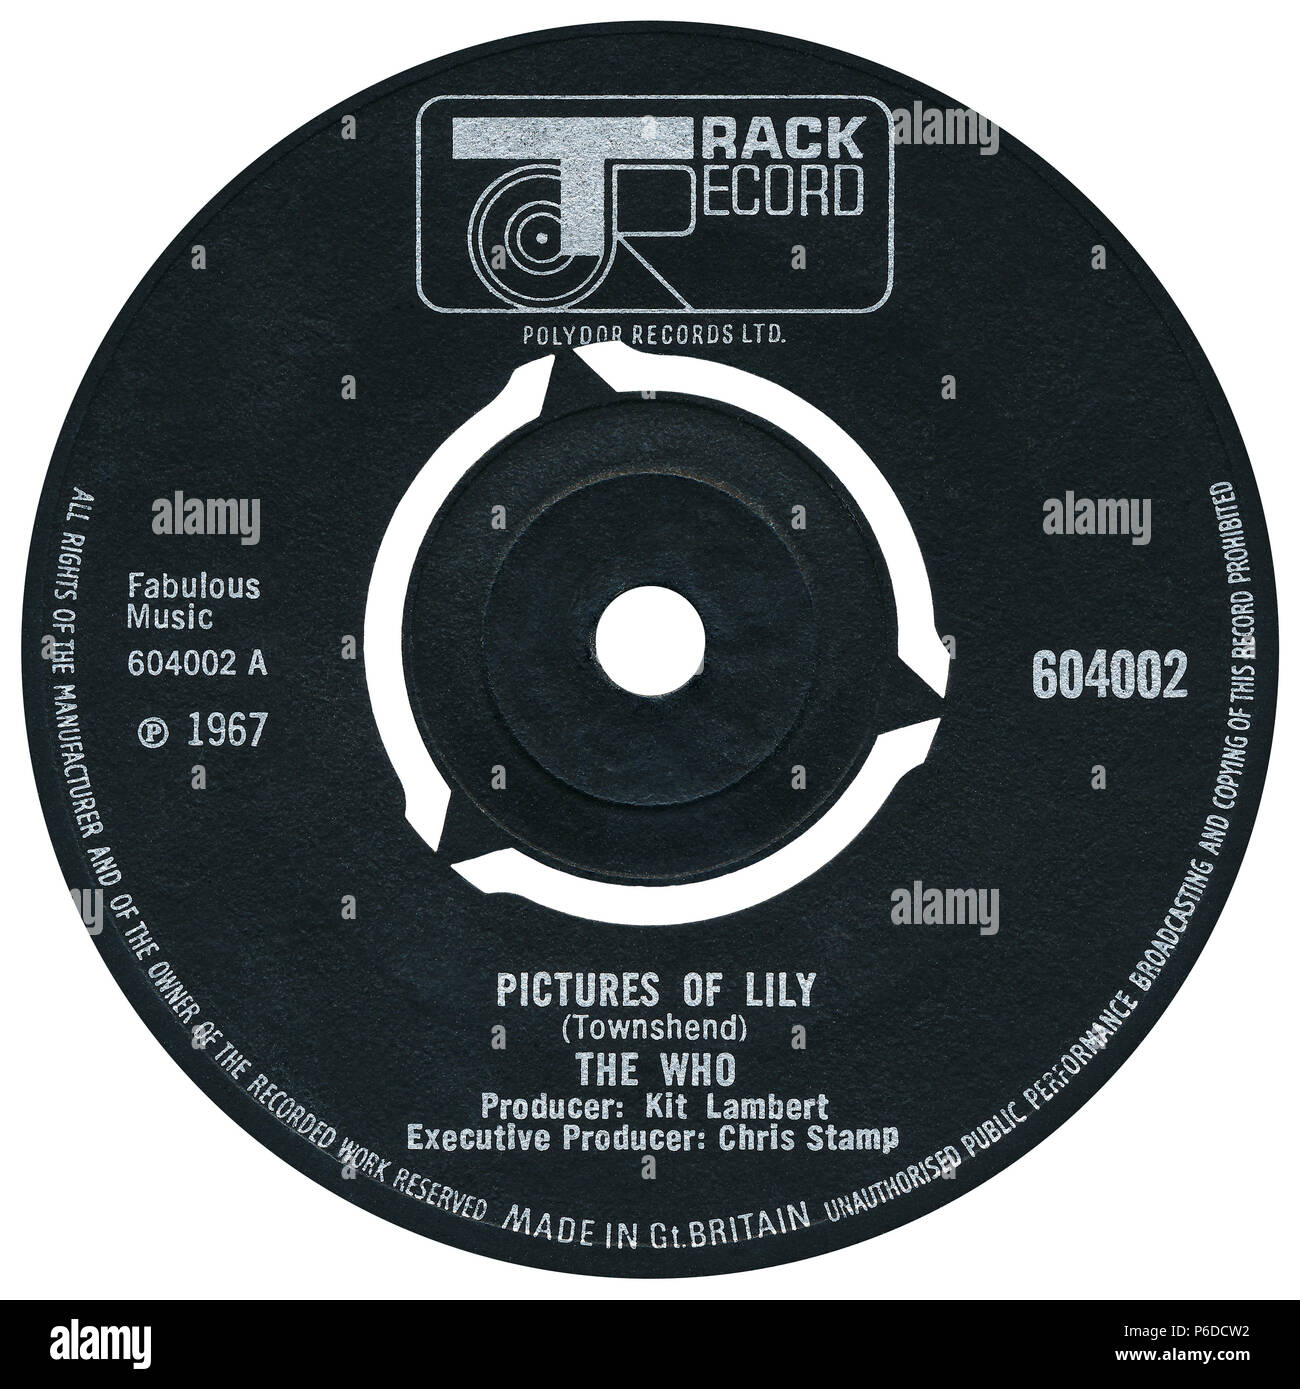 U.K. 45 rpm 7' single of Pictures Of Lily by The Who on Track Records from 1967. Written by Pete Townshend and produced by Kit Lambert and Chris Stamp. Stock Photo